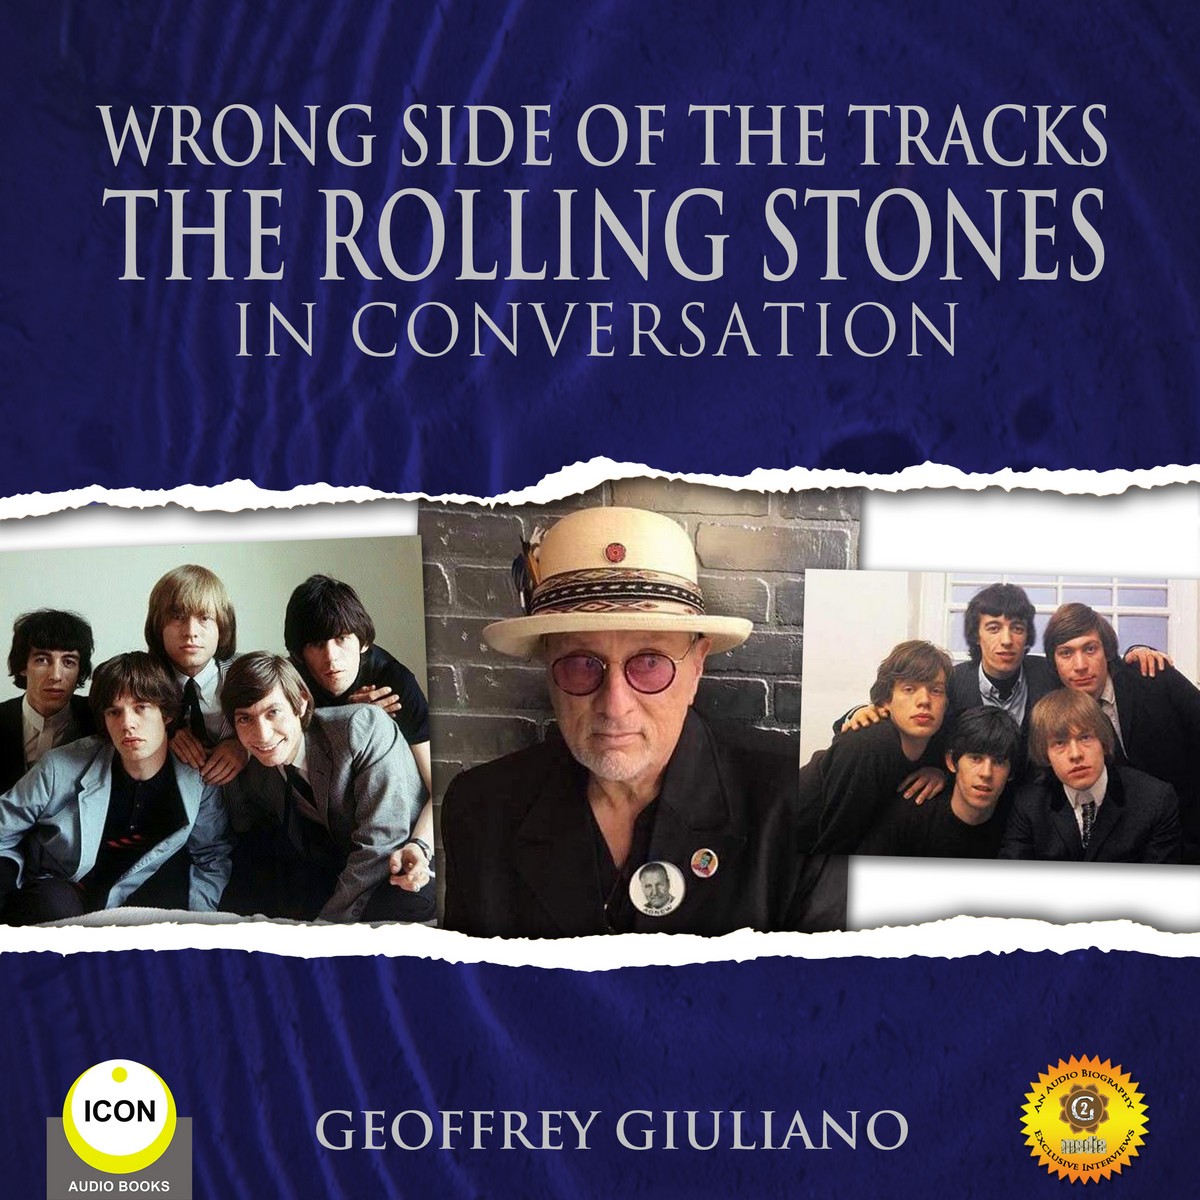 Wrong Side of the Tracks The Rolling Stones – In Conversation